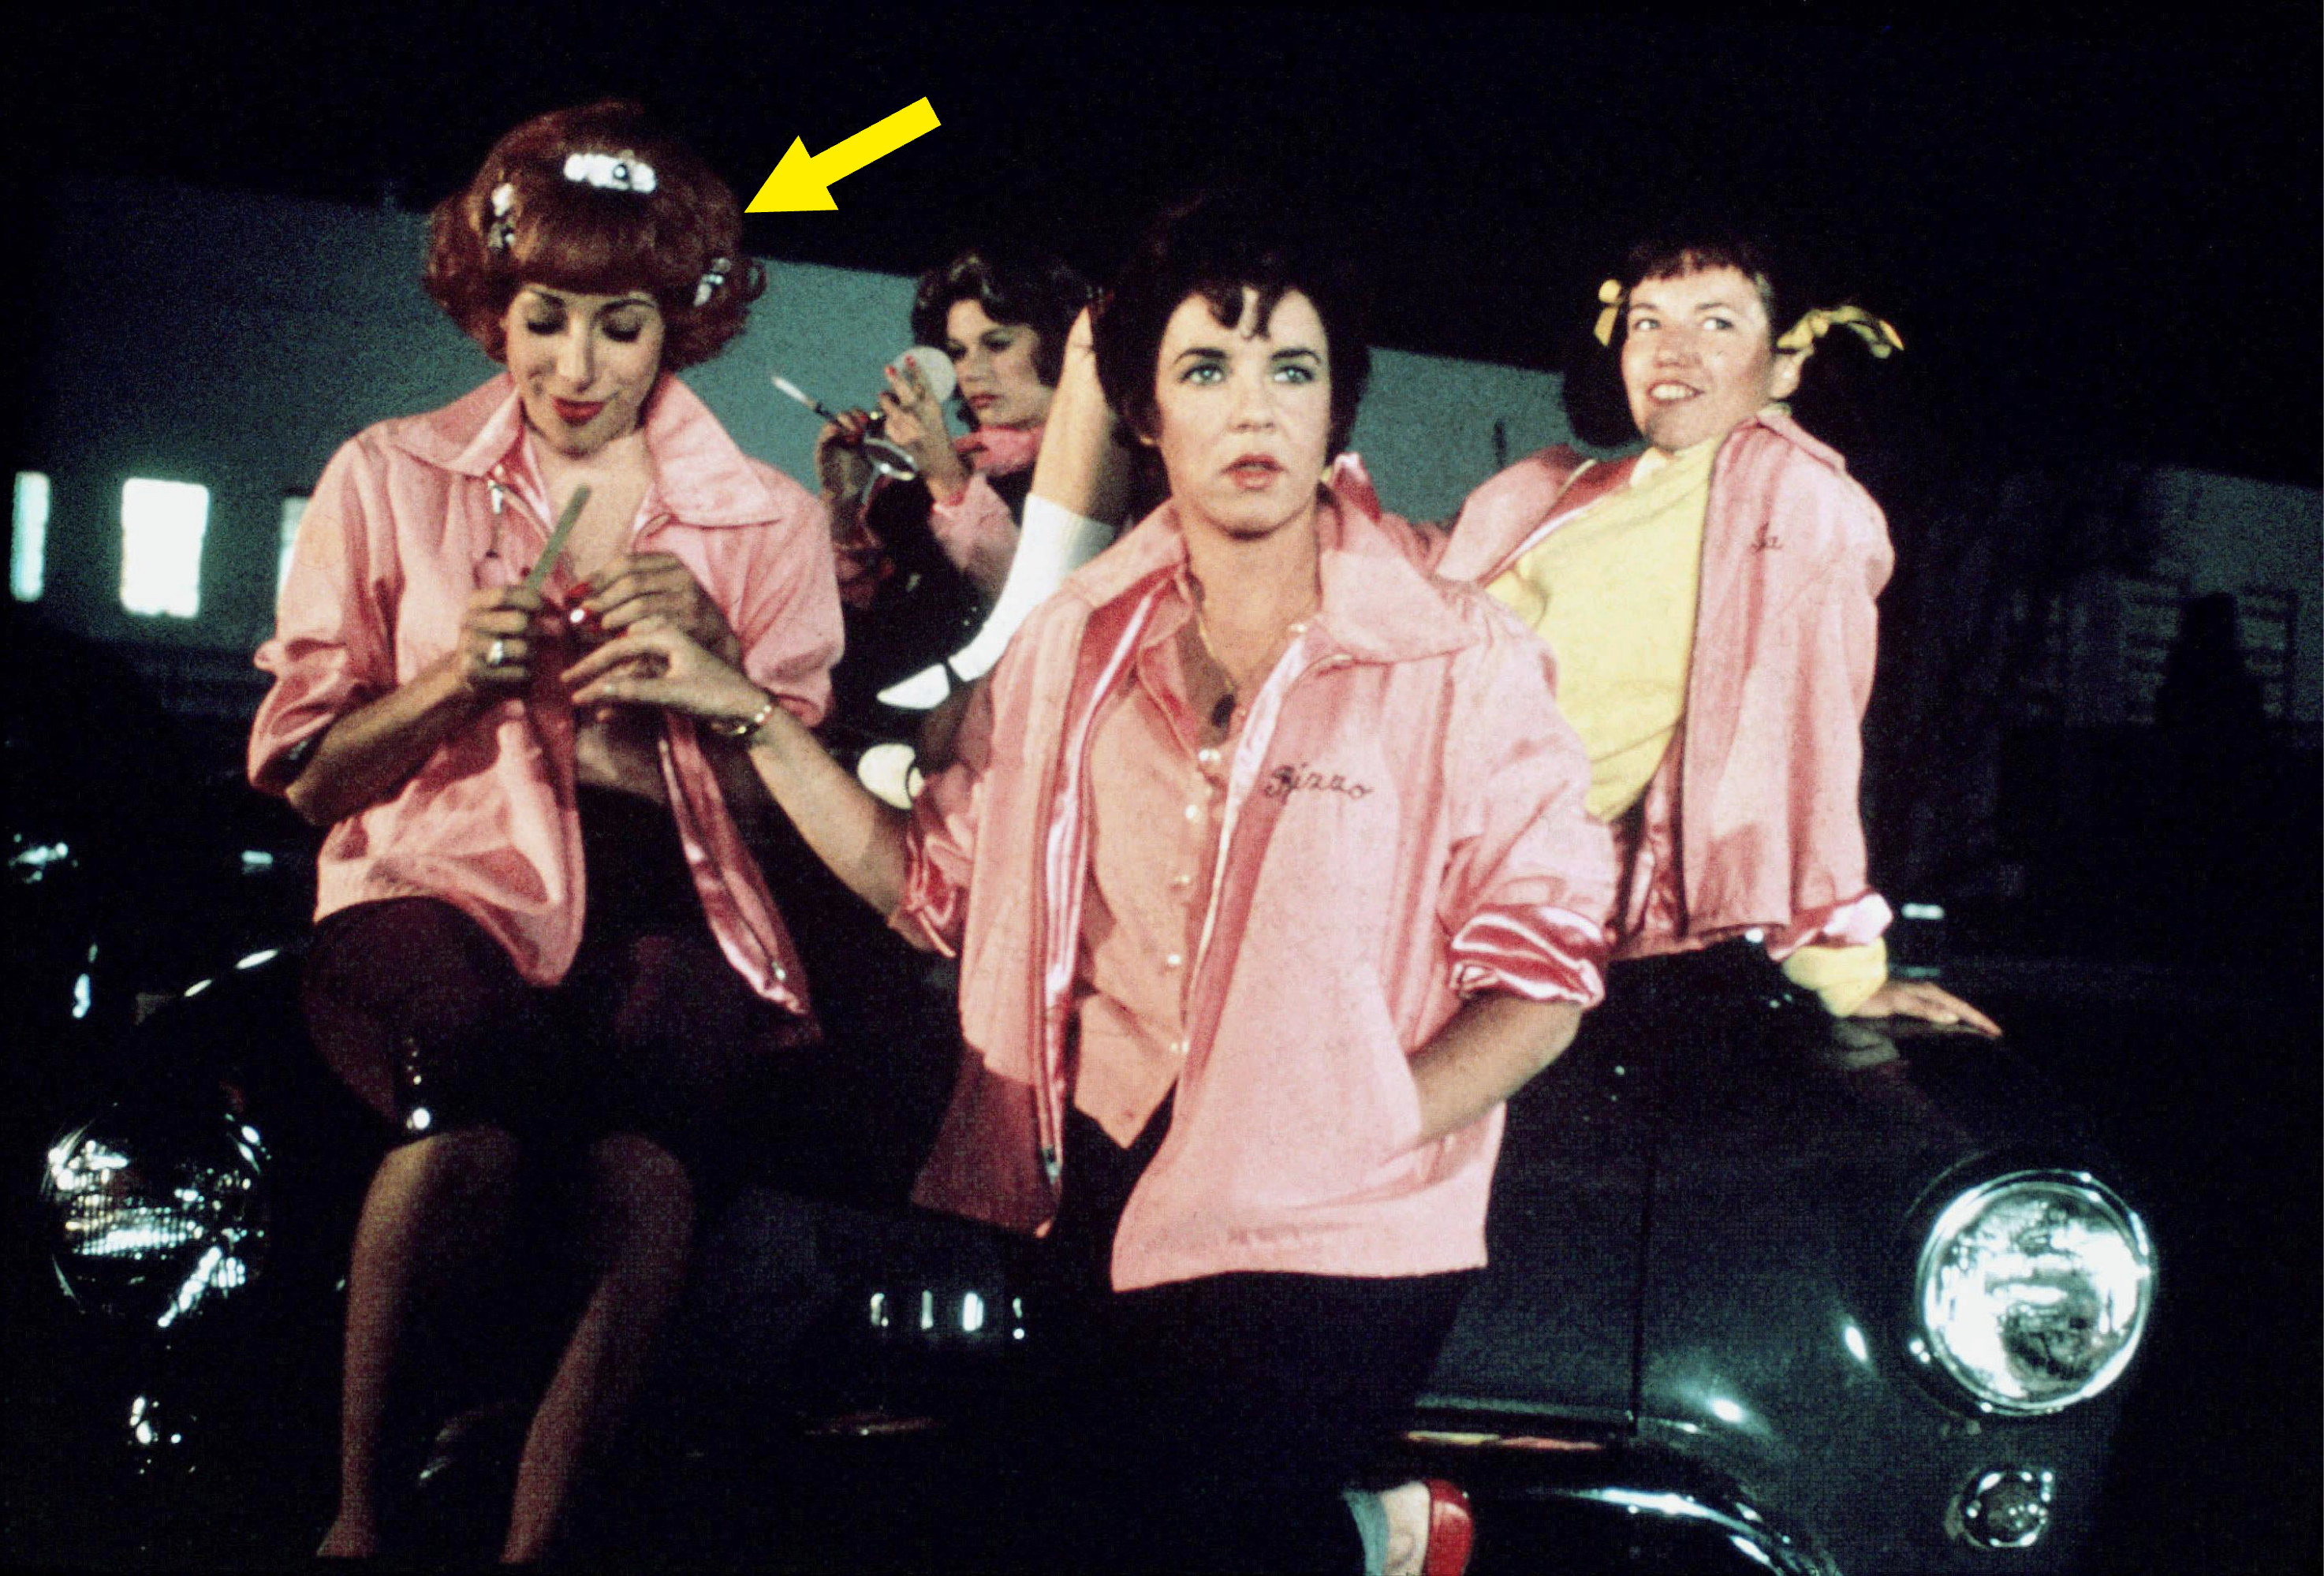 Didi Conn, Jamie Donnelly, Stockard Channing, and Dinah Monaff dressed as the Pink Ladies in Grease